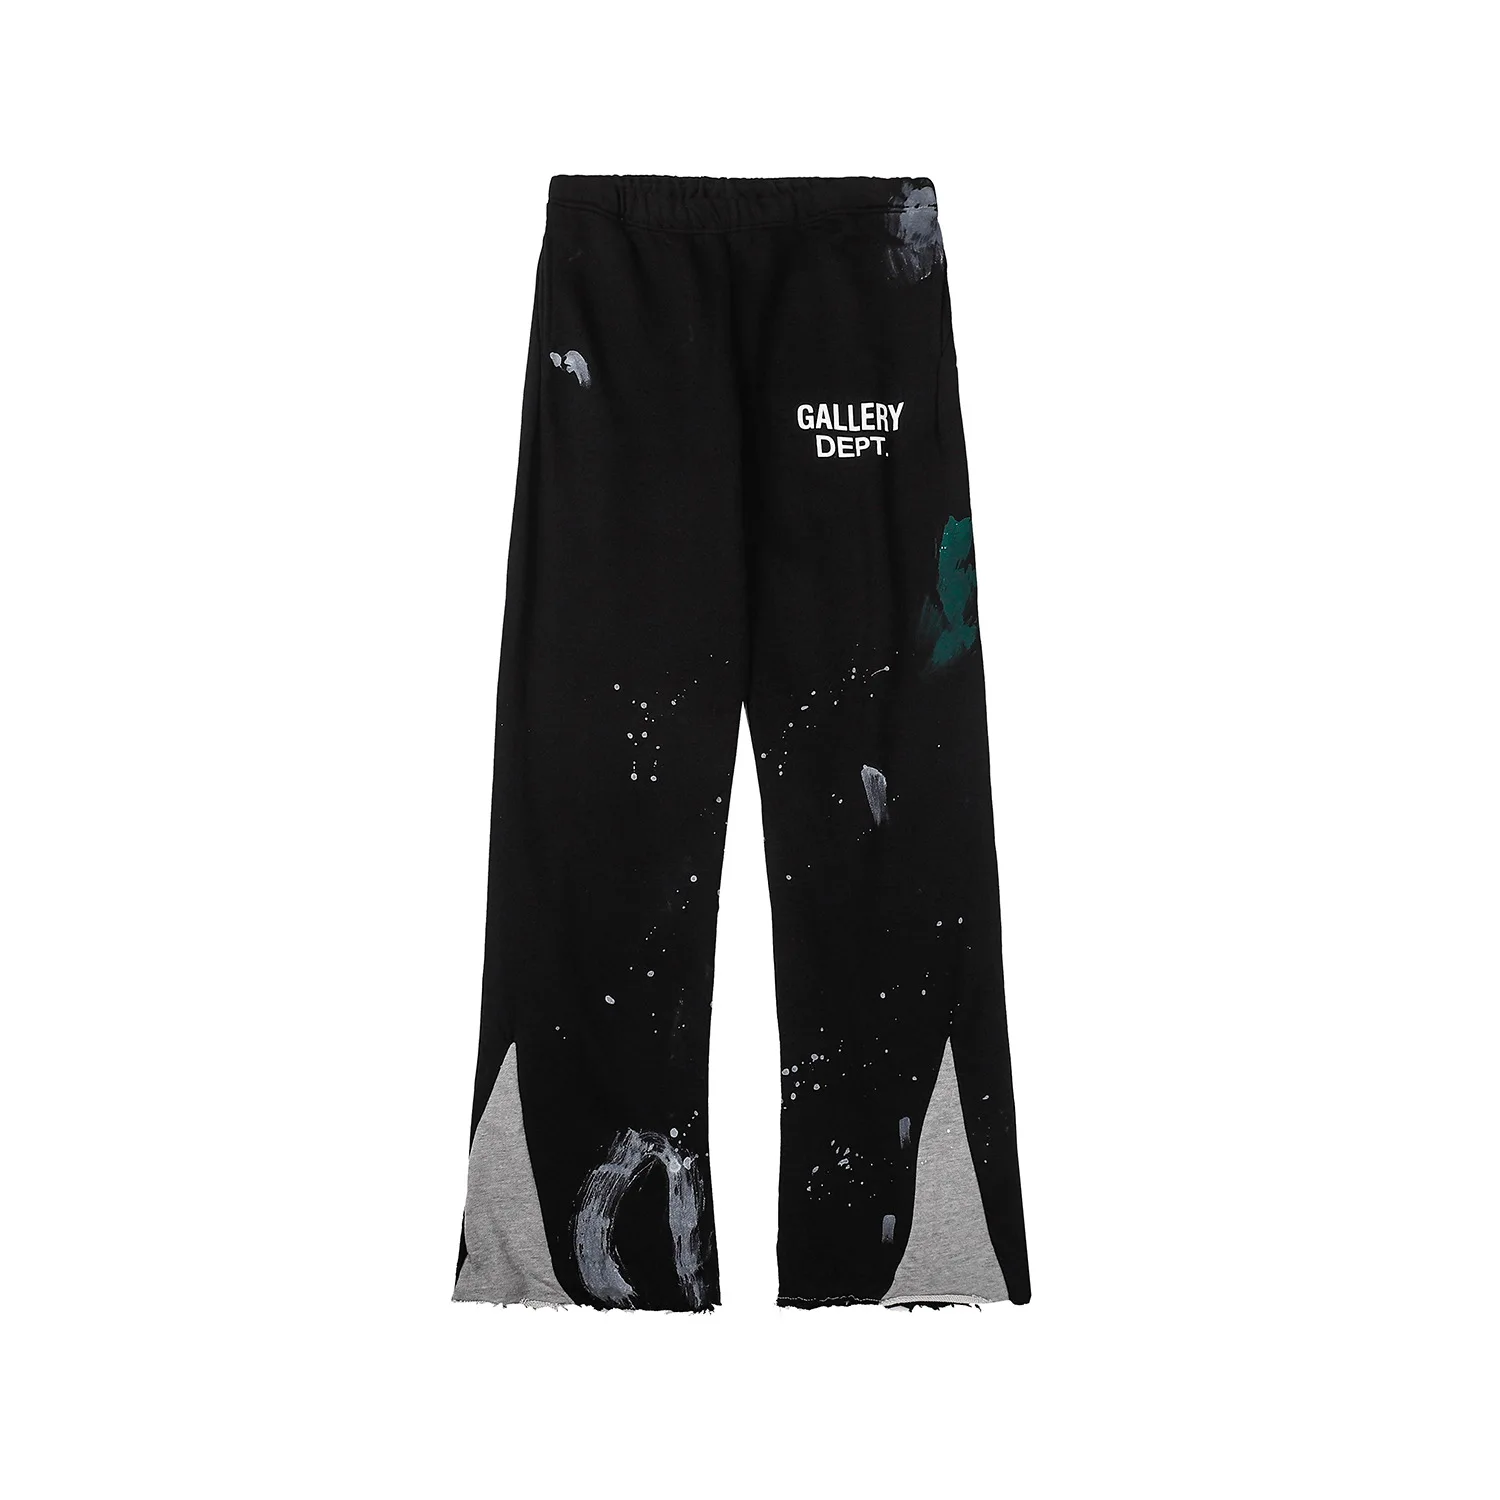 New Fashion Spring and Autumn Gallery Dept SweatPants 2